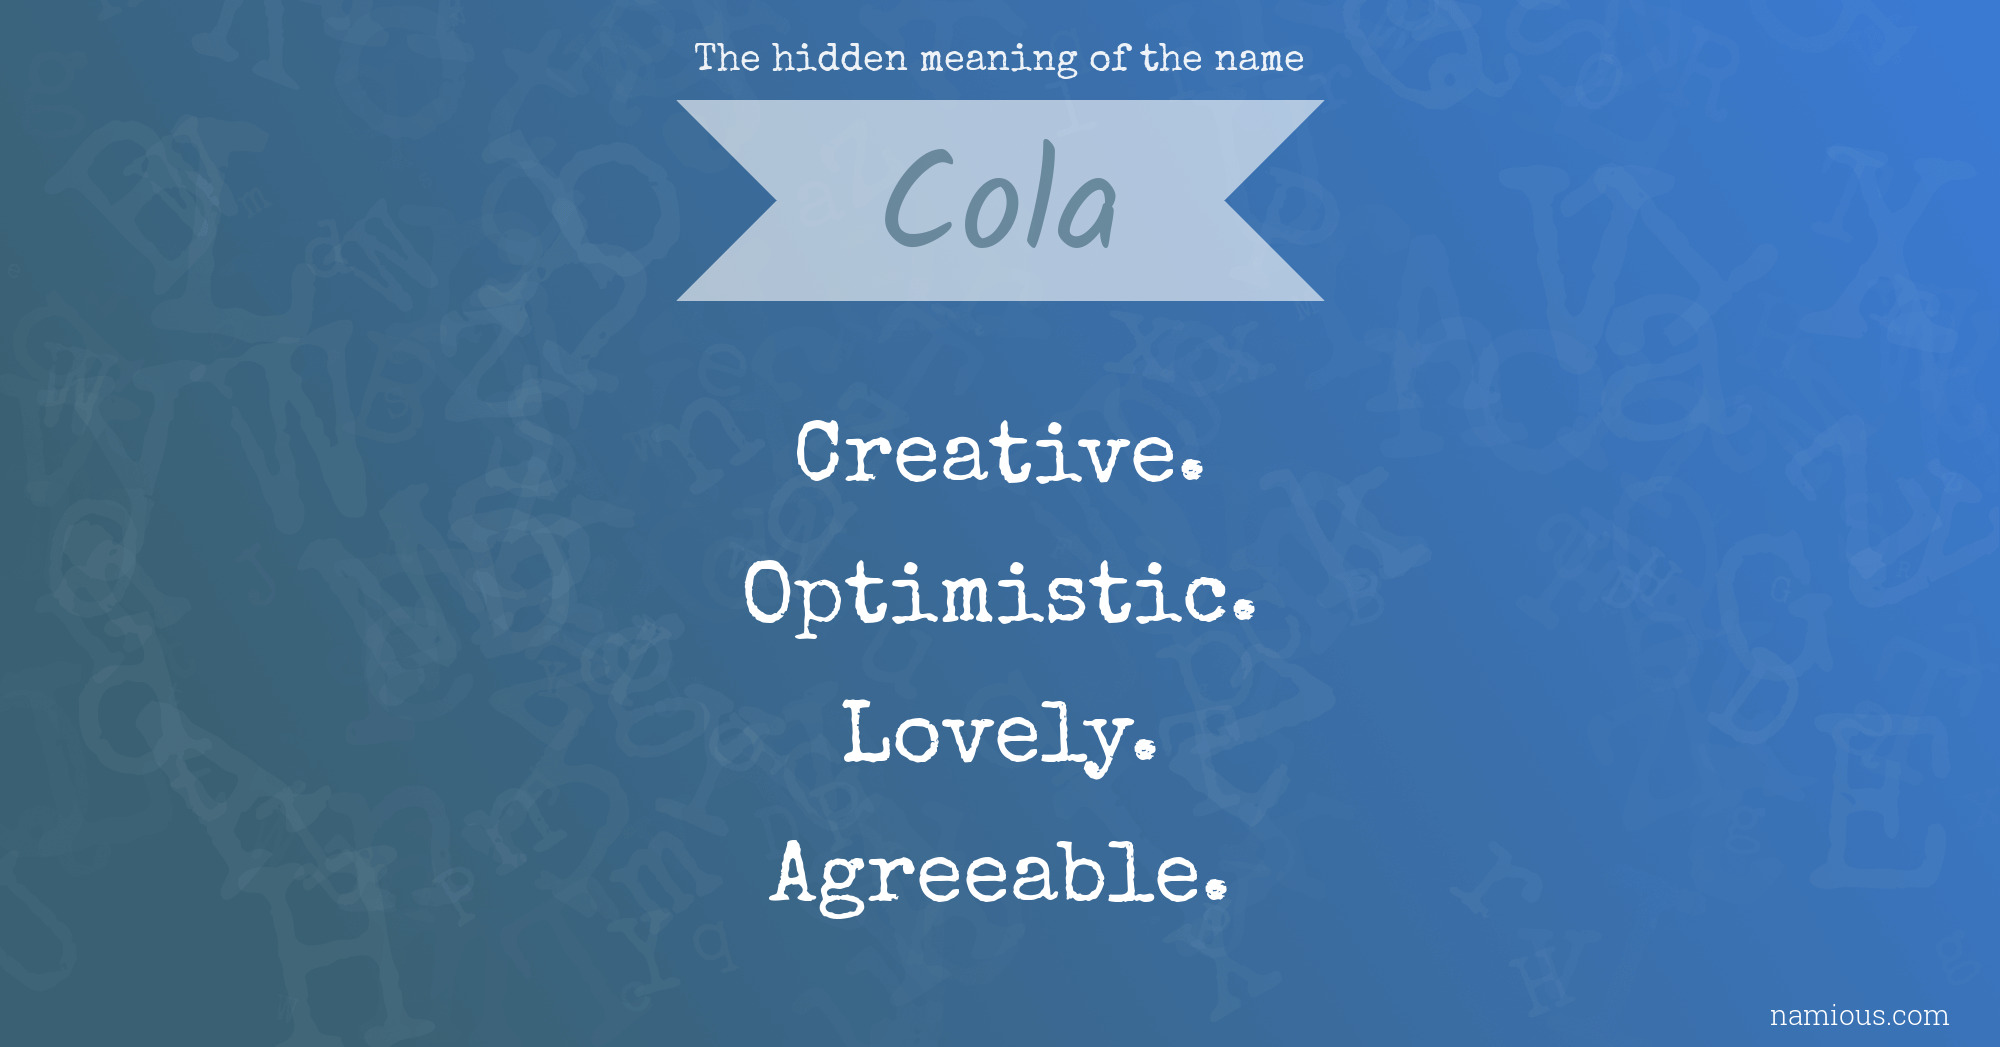 The hidden meaning of the name Cola